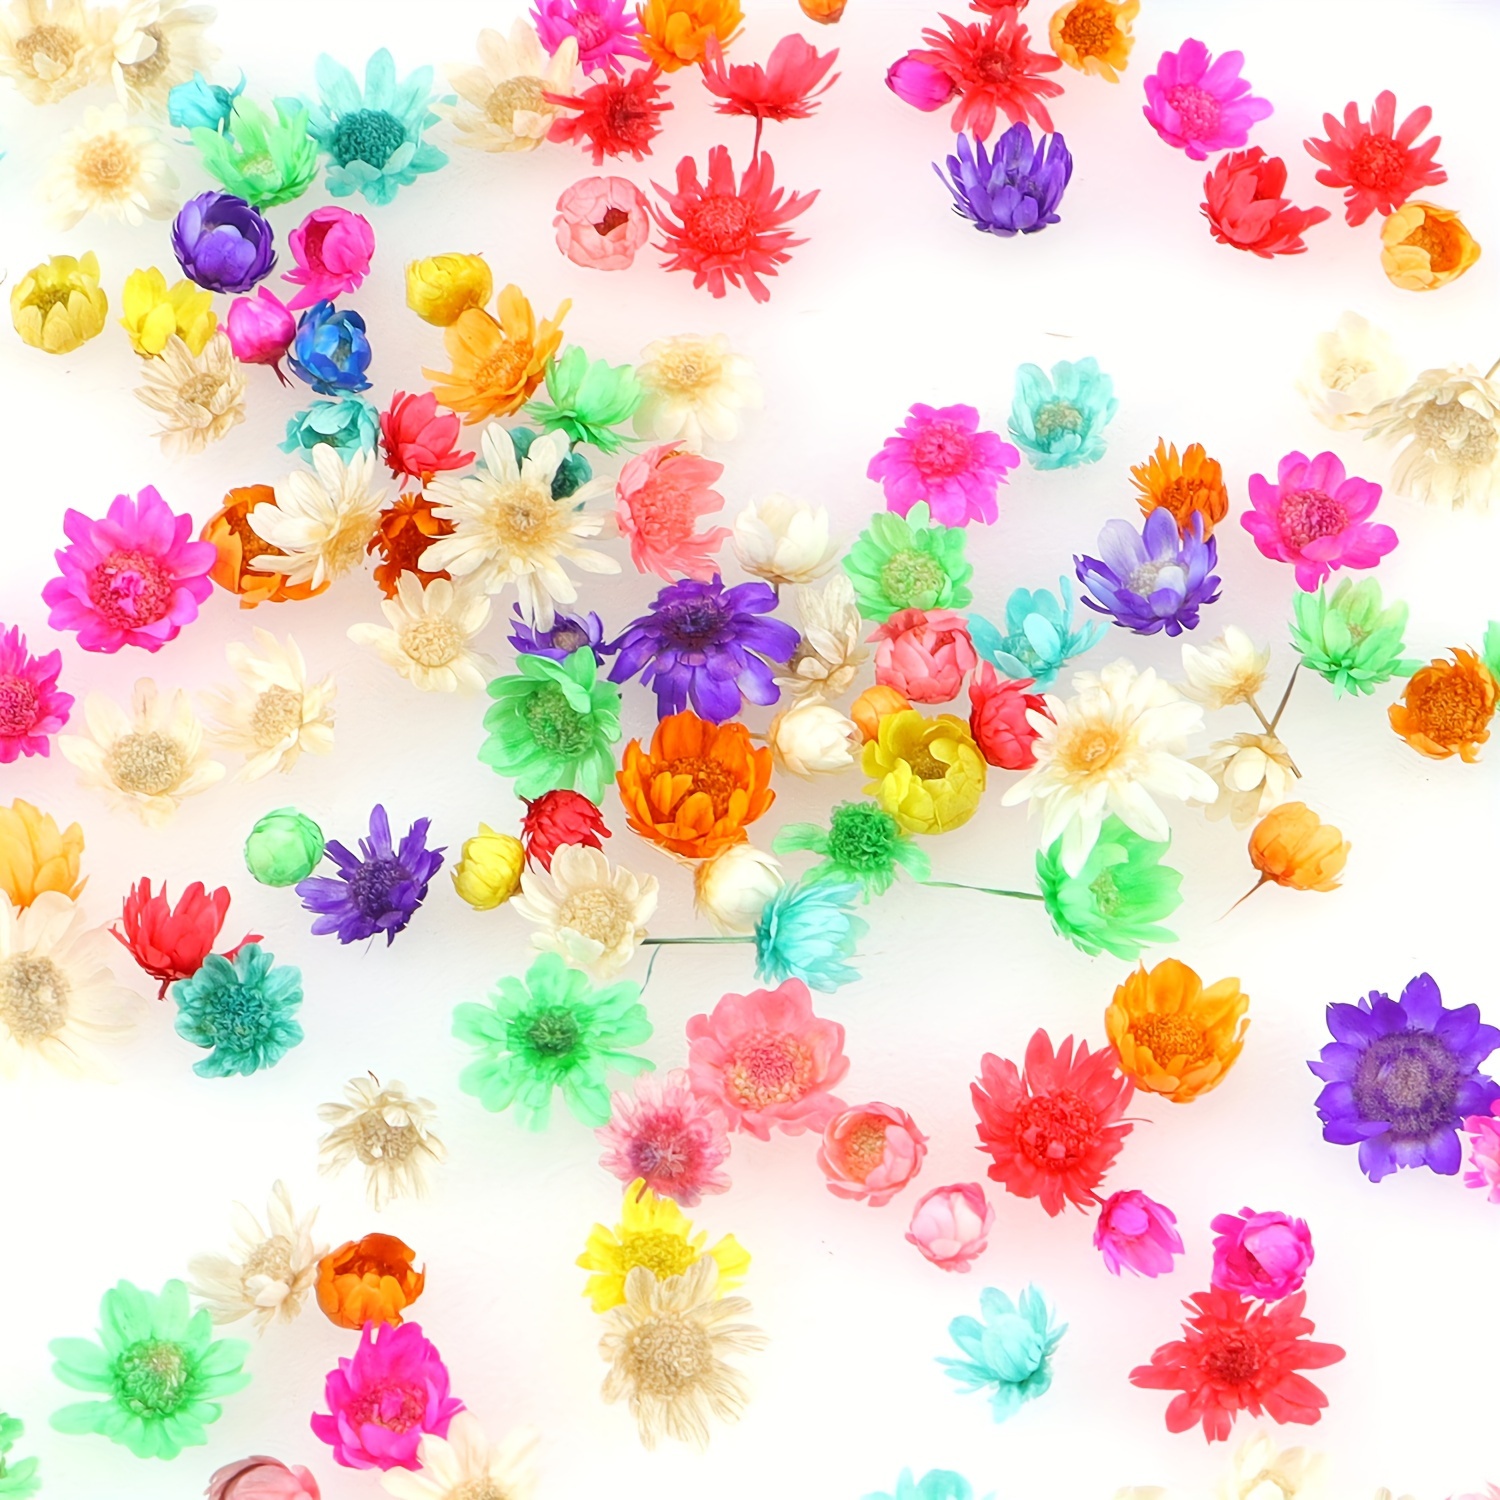 

200pc Mixed Color Mini Star Flower Heads, Uv Resin Fillers For Diy Jewelry And Apparel Accessories, Craft Supplies With No Power Needed - Multicolor Material Pack For Creative Projects